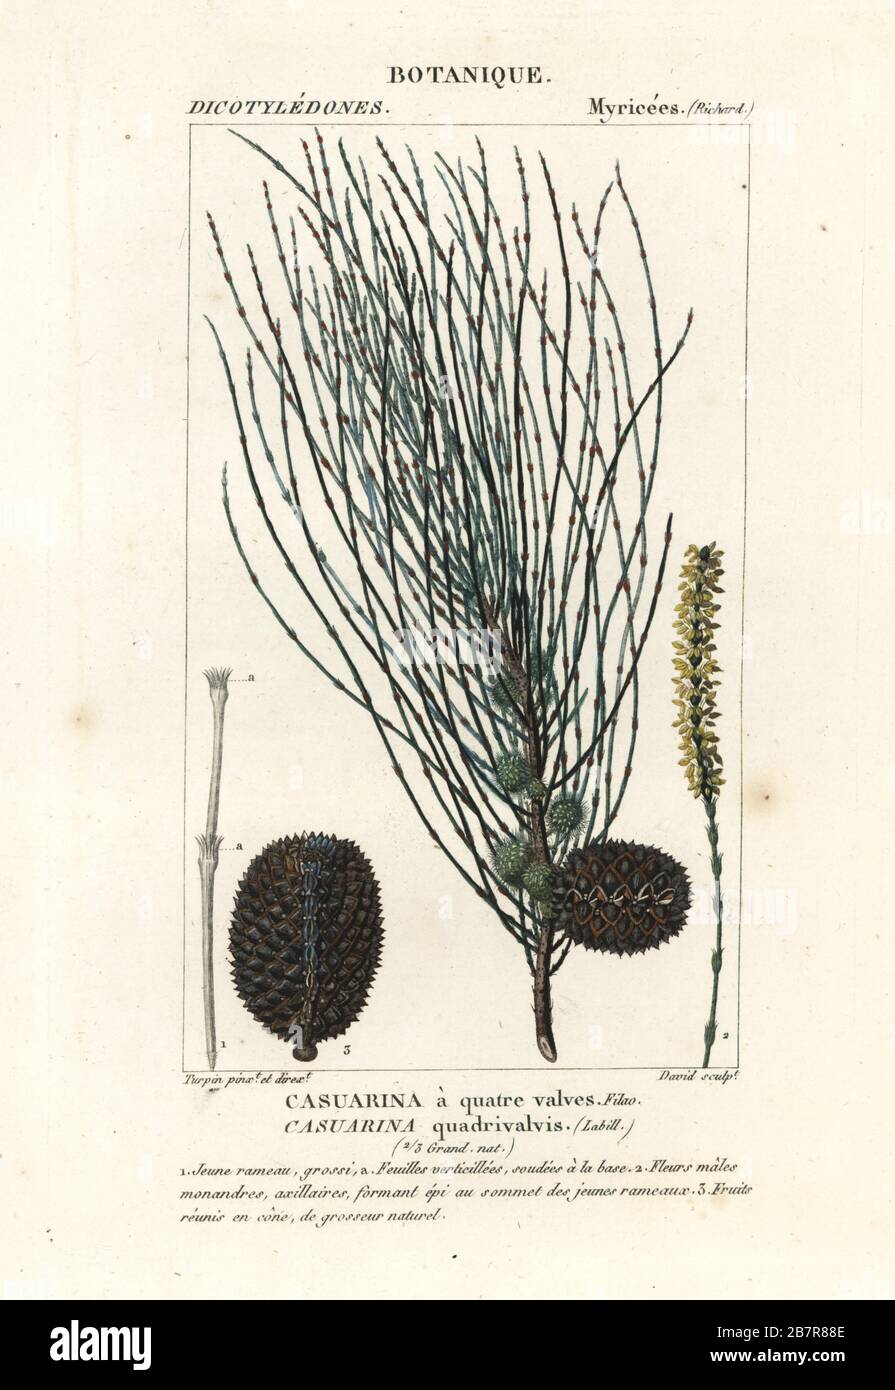 Drooping sheoak, Allocasuarina verticillata, a nitrogen-fixing tree native to Australia. Casuarina quadrivalvis, Casuarina a quatre valves. Handcoloured copperplate stipple engraving from Antoine Laurent de Jussieu's Dizionario delle Scienze Naturali, Dictionary of Natural Science, Florence, Italy, 1837. Illustration engraved by David, drawn and directed by Pierre Jean-Francois Turpin, and published by Batelli e Figli. Turpin (1775-1840) is considered one of the greatest French botanical illustrators of the 19th century. Stock Photo